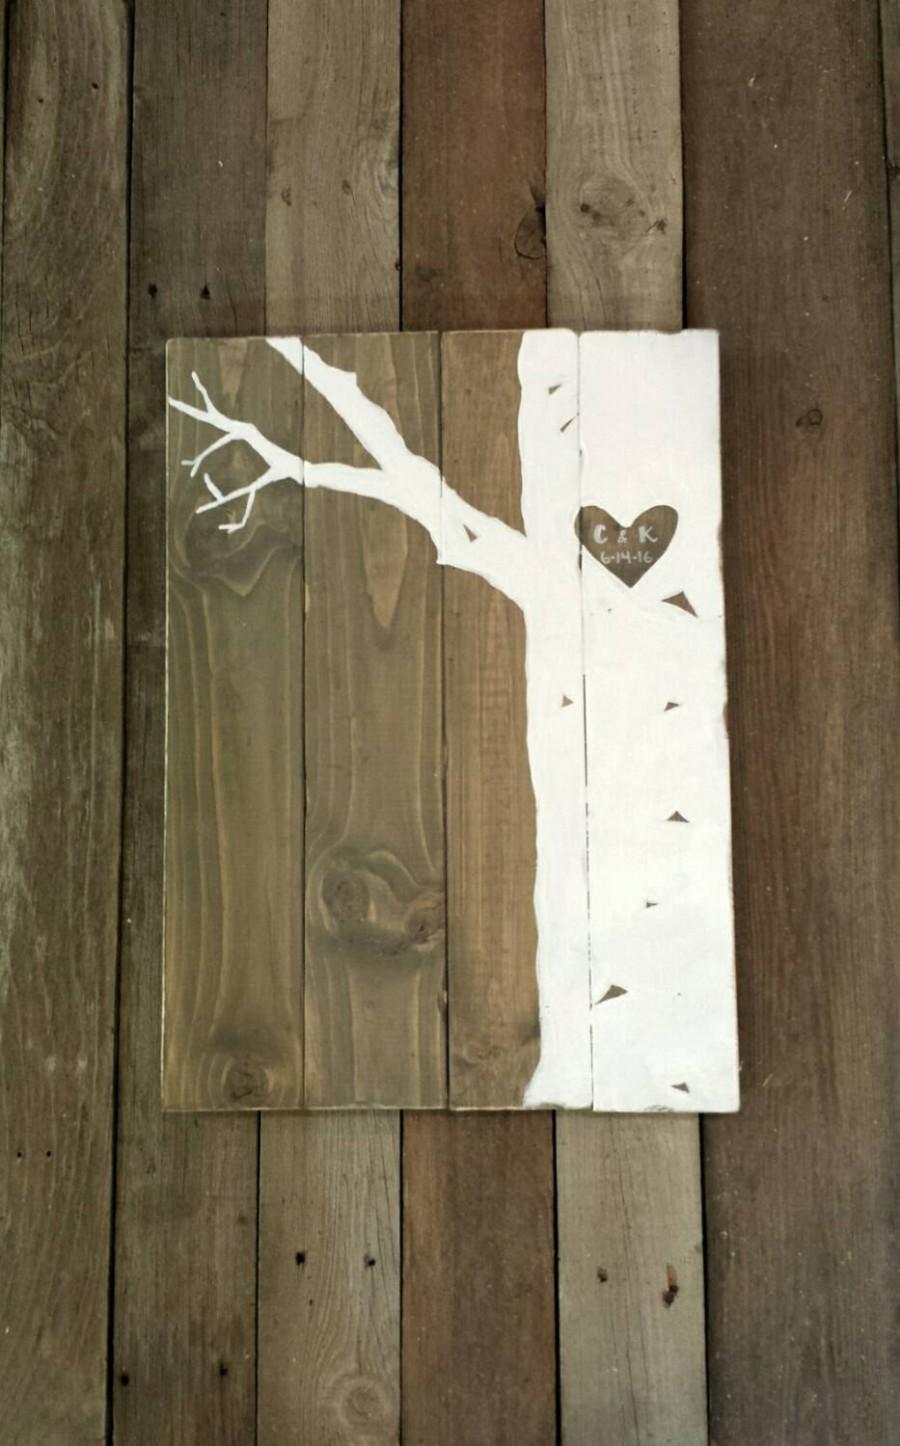 Wedding - Wooden Guest Book, Large Wood Guest Book Sign, Large Birch Tree Guest Book, Established, Rustic Wedding Decor, Shabby Chic Wedding Decor